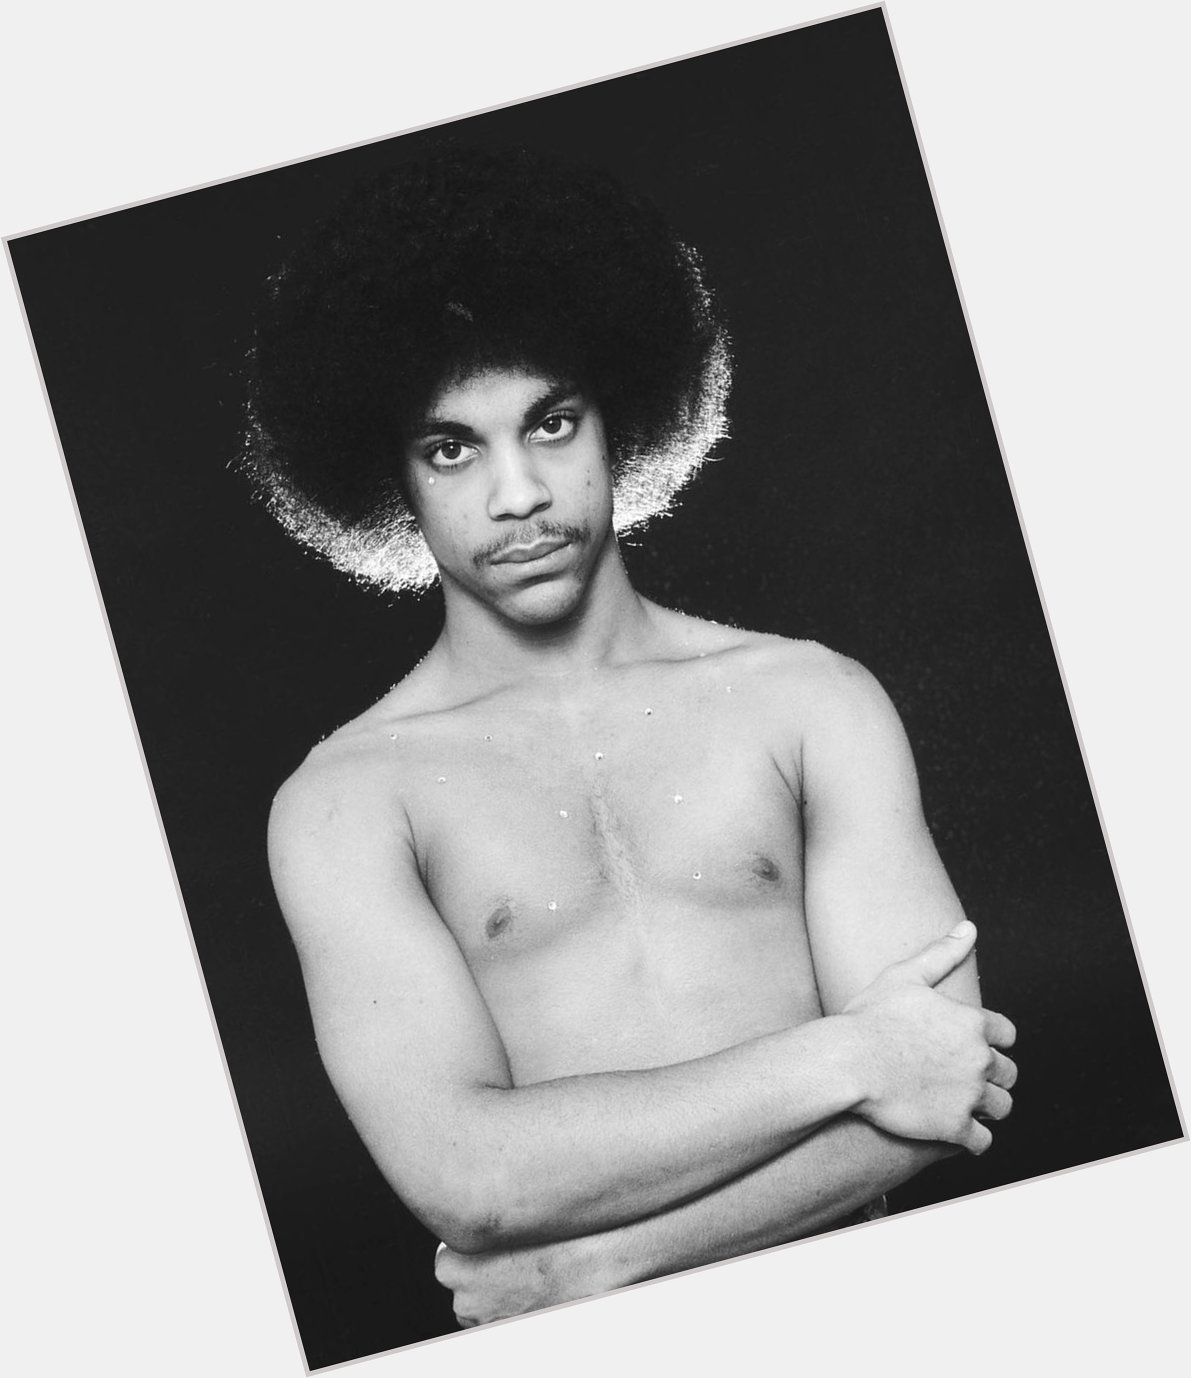 Happy Birthday to the legendary Prince. Today he would have turned 62 years old. RIP 